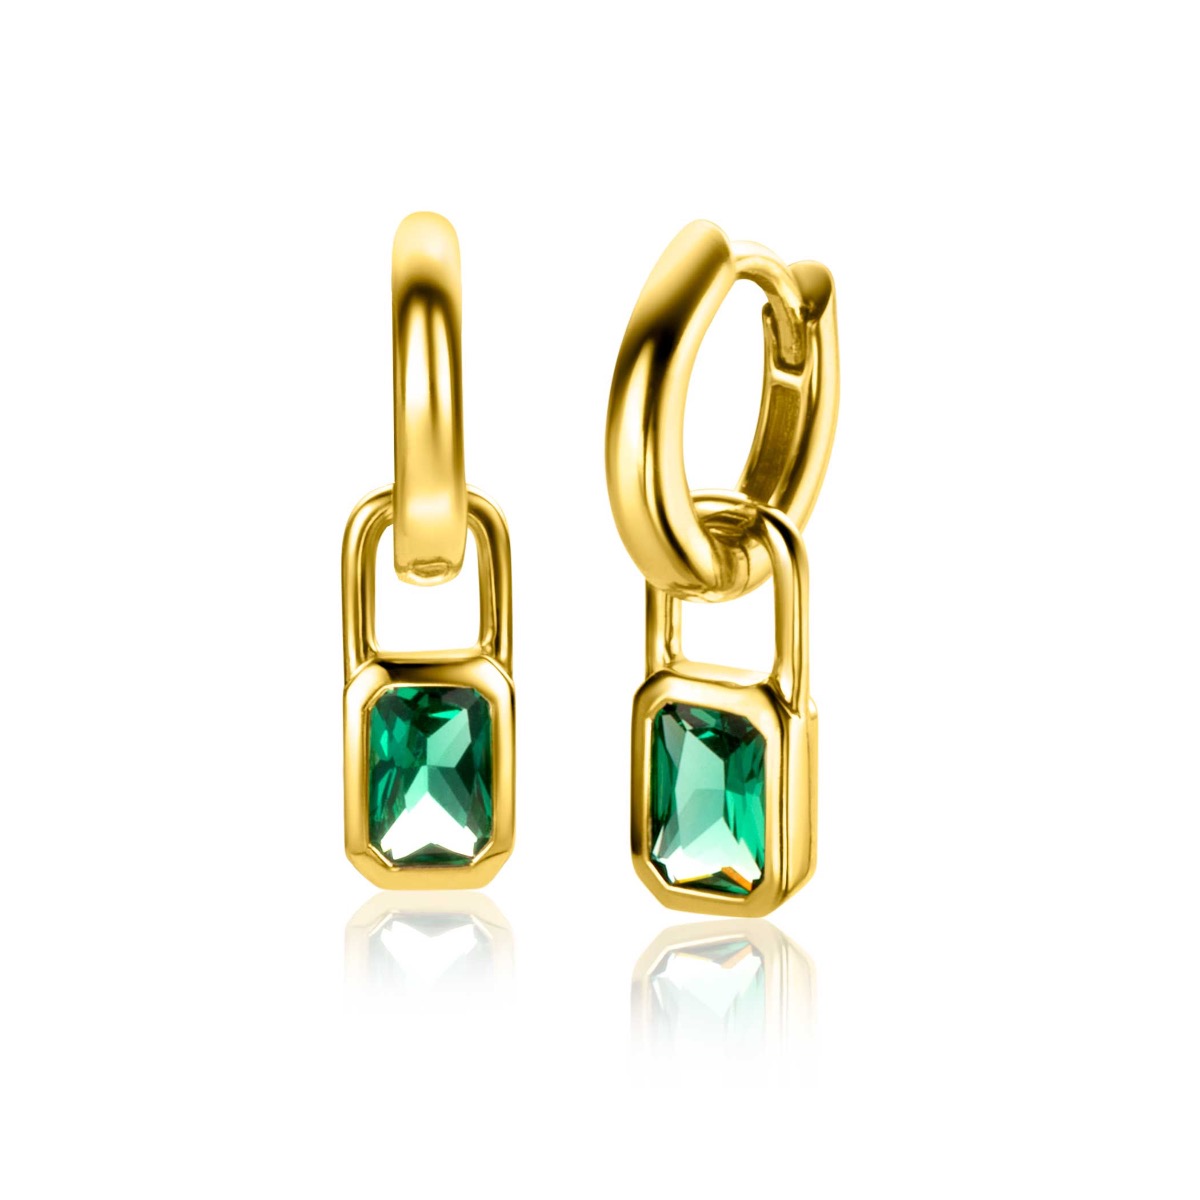 13mm ZINZI Gold Plated Sterling Silver Earrings Pendants Rectangle with Green Color Stones ZICH2307 (excl. hoop earrings)